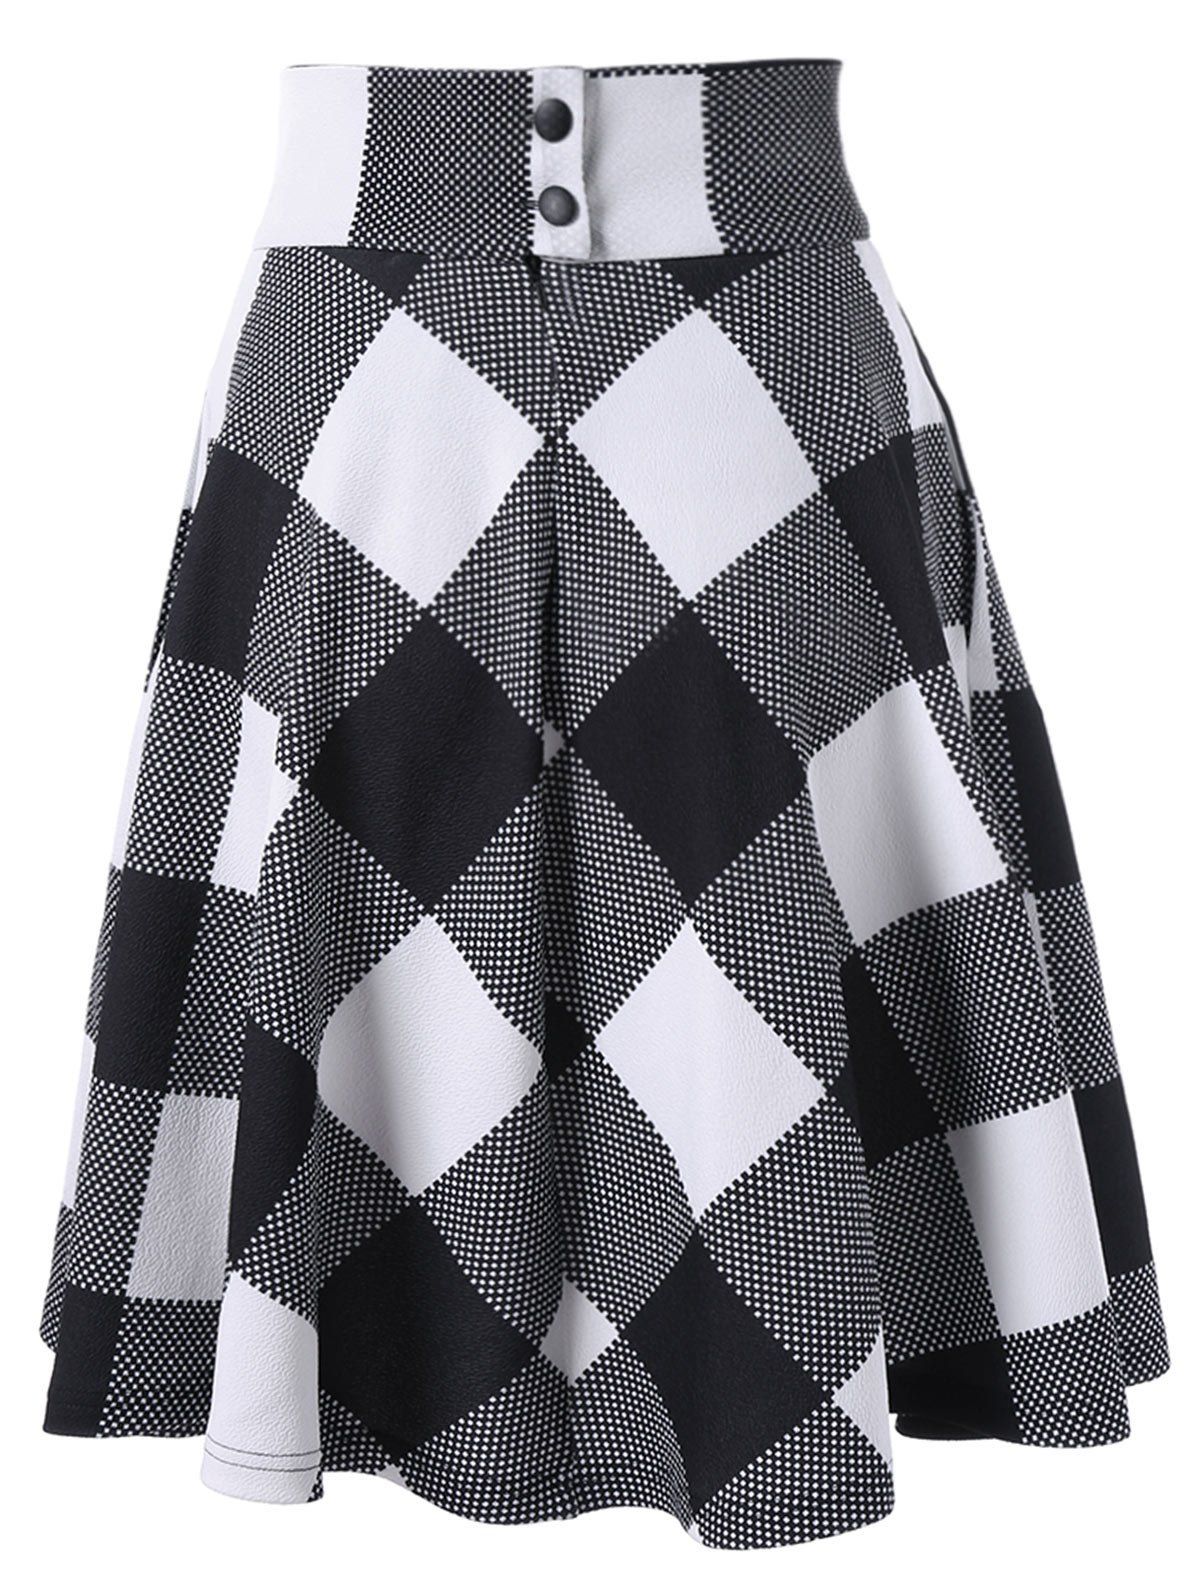 2018 Zippered High Waisted Checked Skirt WHITE/BLACK XL In Skirts ...